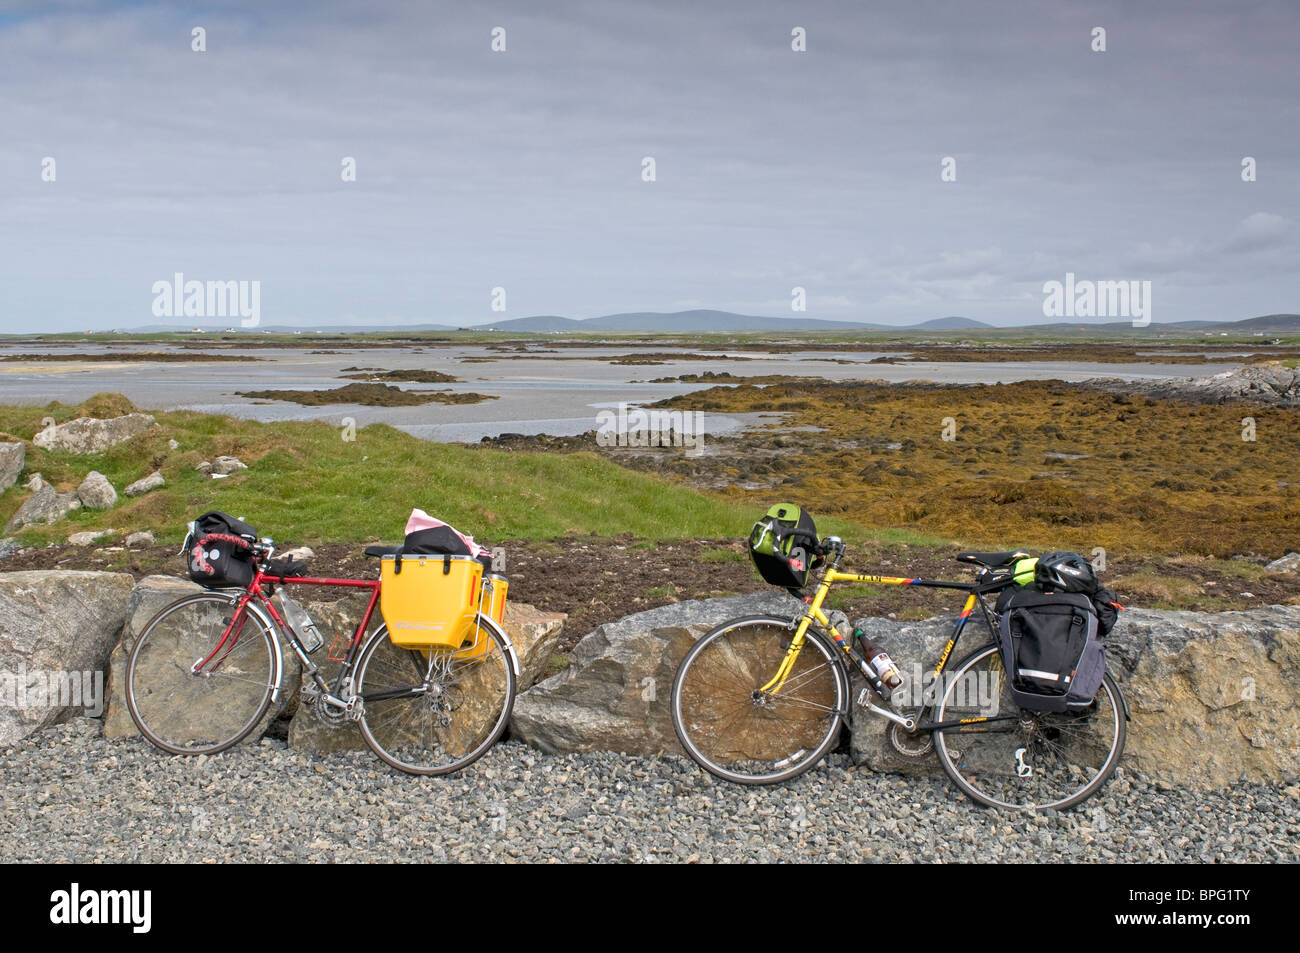 Cycling on South Uist at Gramsdal, Cairinis, Outer Hebrides, Western Isles, Scotland.  SCO 6461 Stock Photo